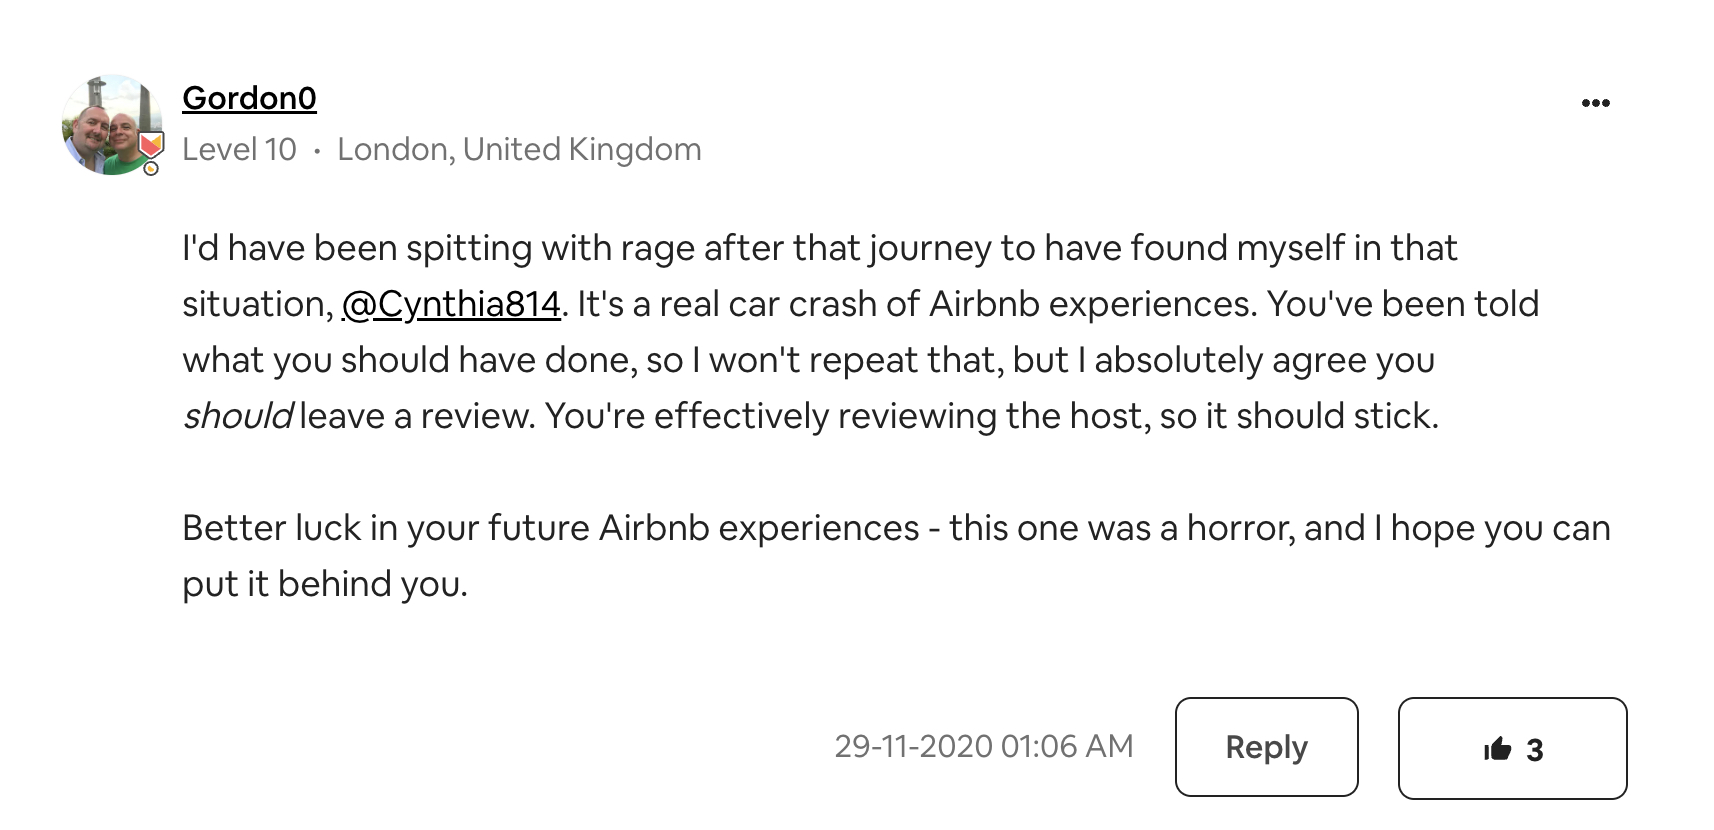 Screenshot from Airbnb community showing a conversation about a double booking and leaving a review